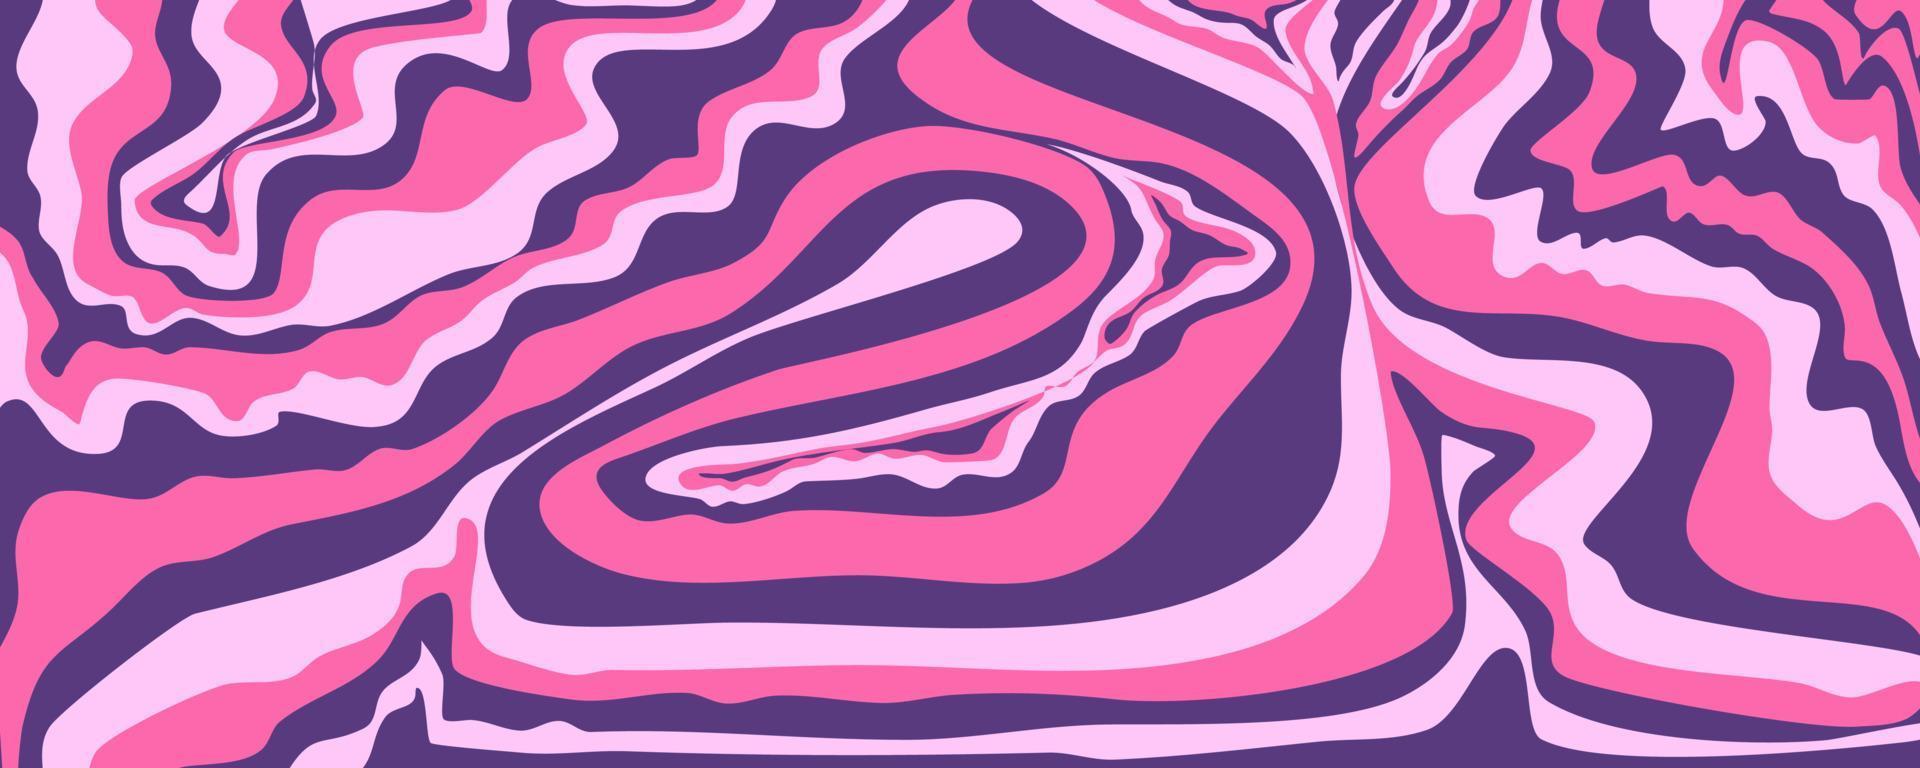 Wave y2k background for retro design. Liquid groovy marble pink background. Purple y2k pattern in modern style pink. Psychedelic retro wave wallpaper vector